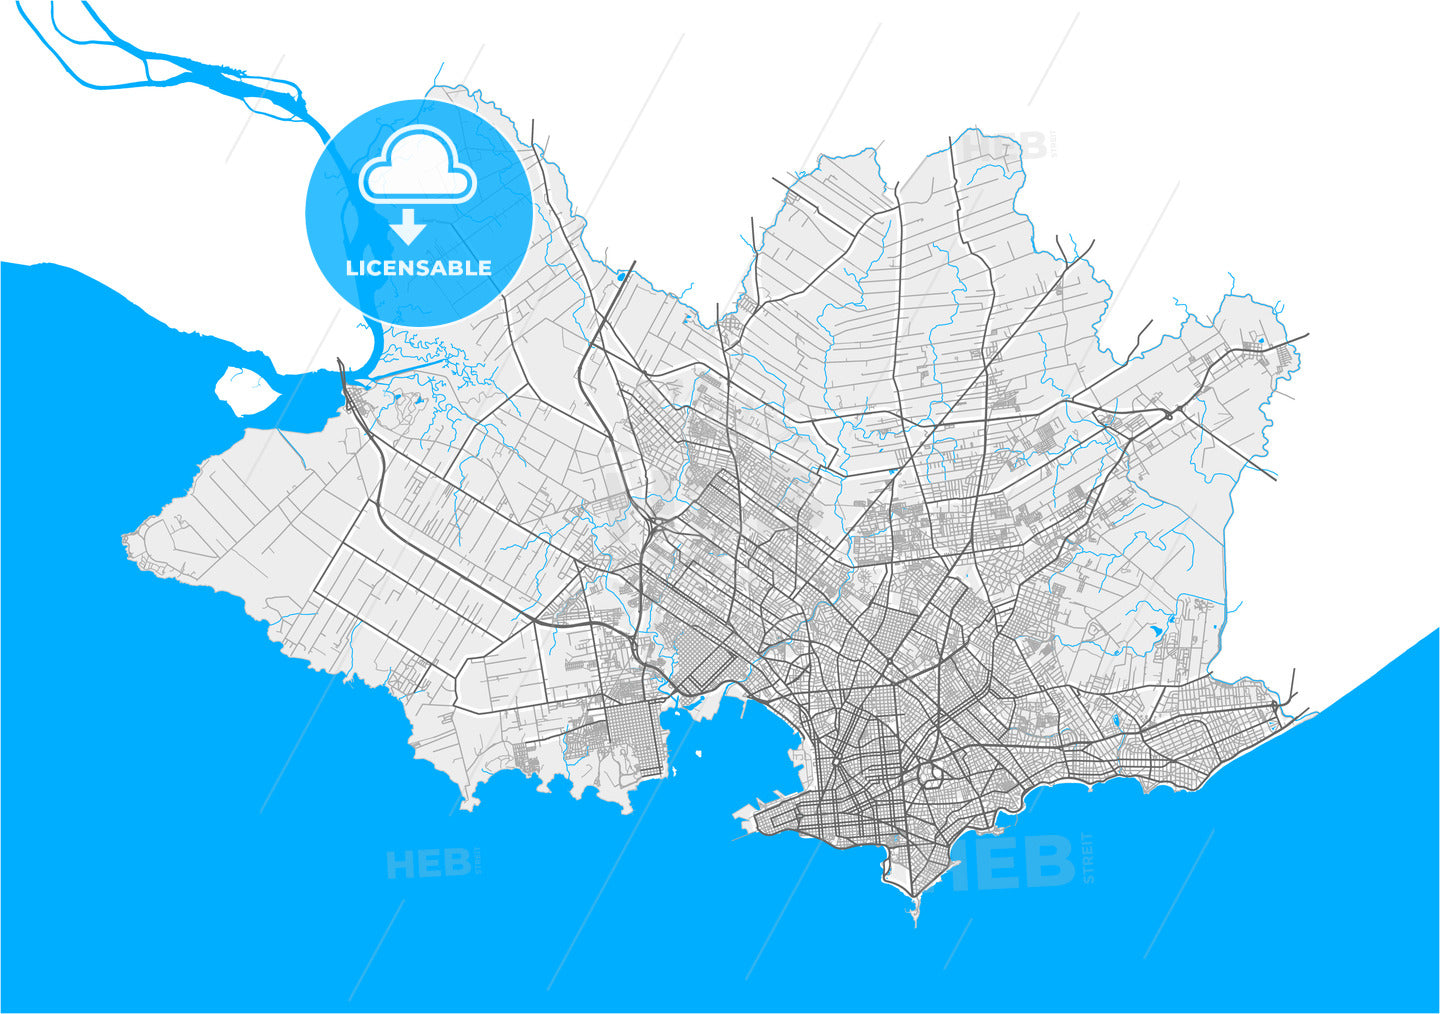 Montevideo, Uruguay, high quality vector map